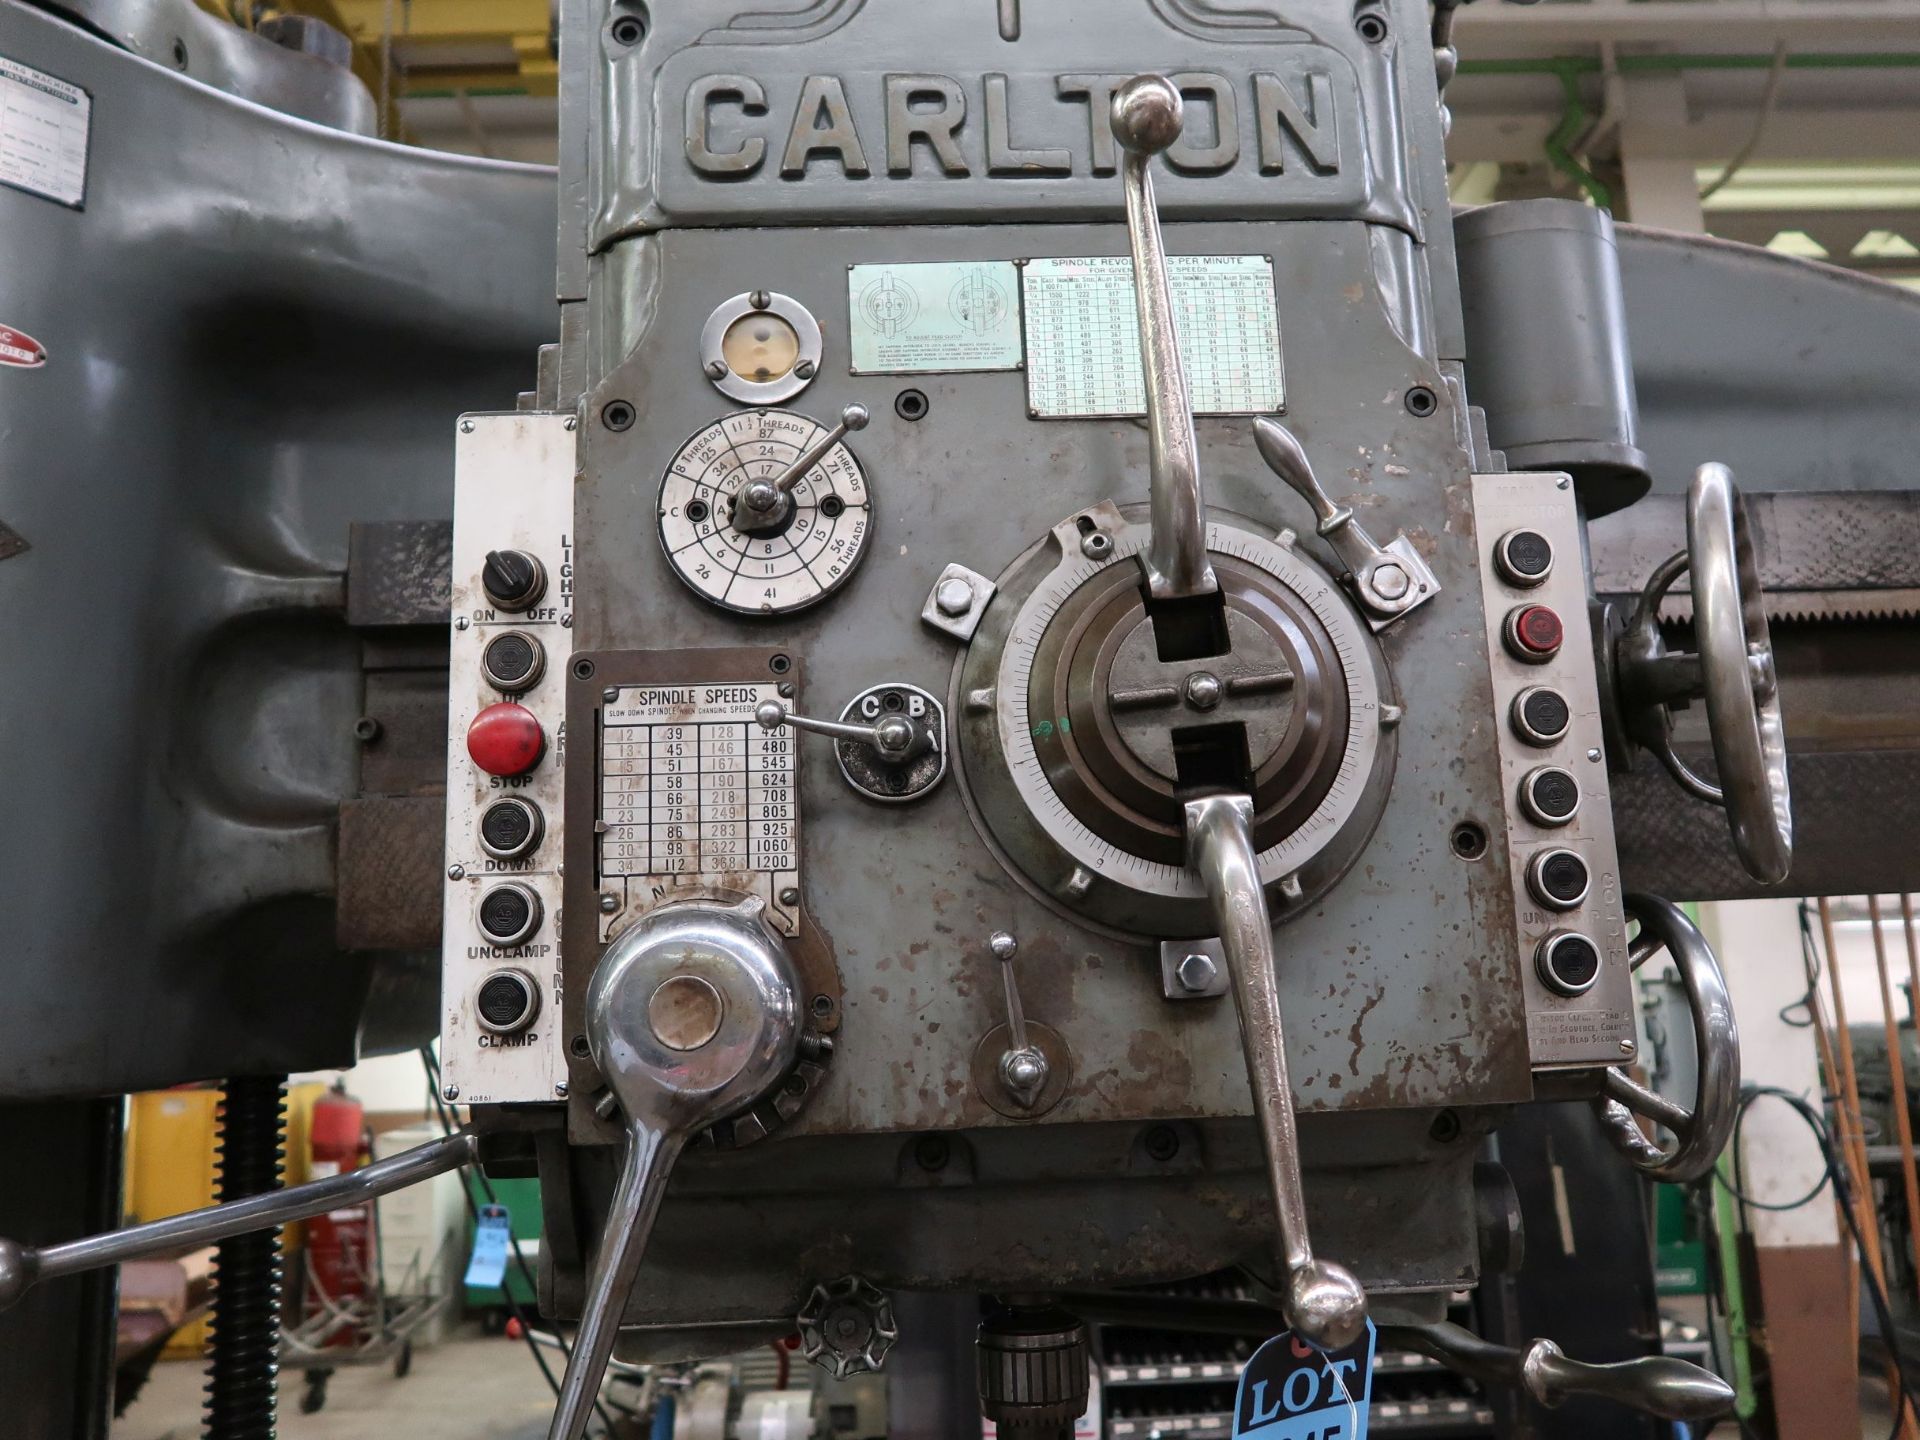 5' ARM X 15" COLUMN CARLTON RADIAL ARM DRILL; S/N 3A-4999, SPINDLE SPEEDS 12-1,200 RPM, 30" X 24" - Image 5 of 12